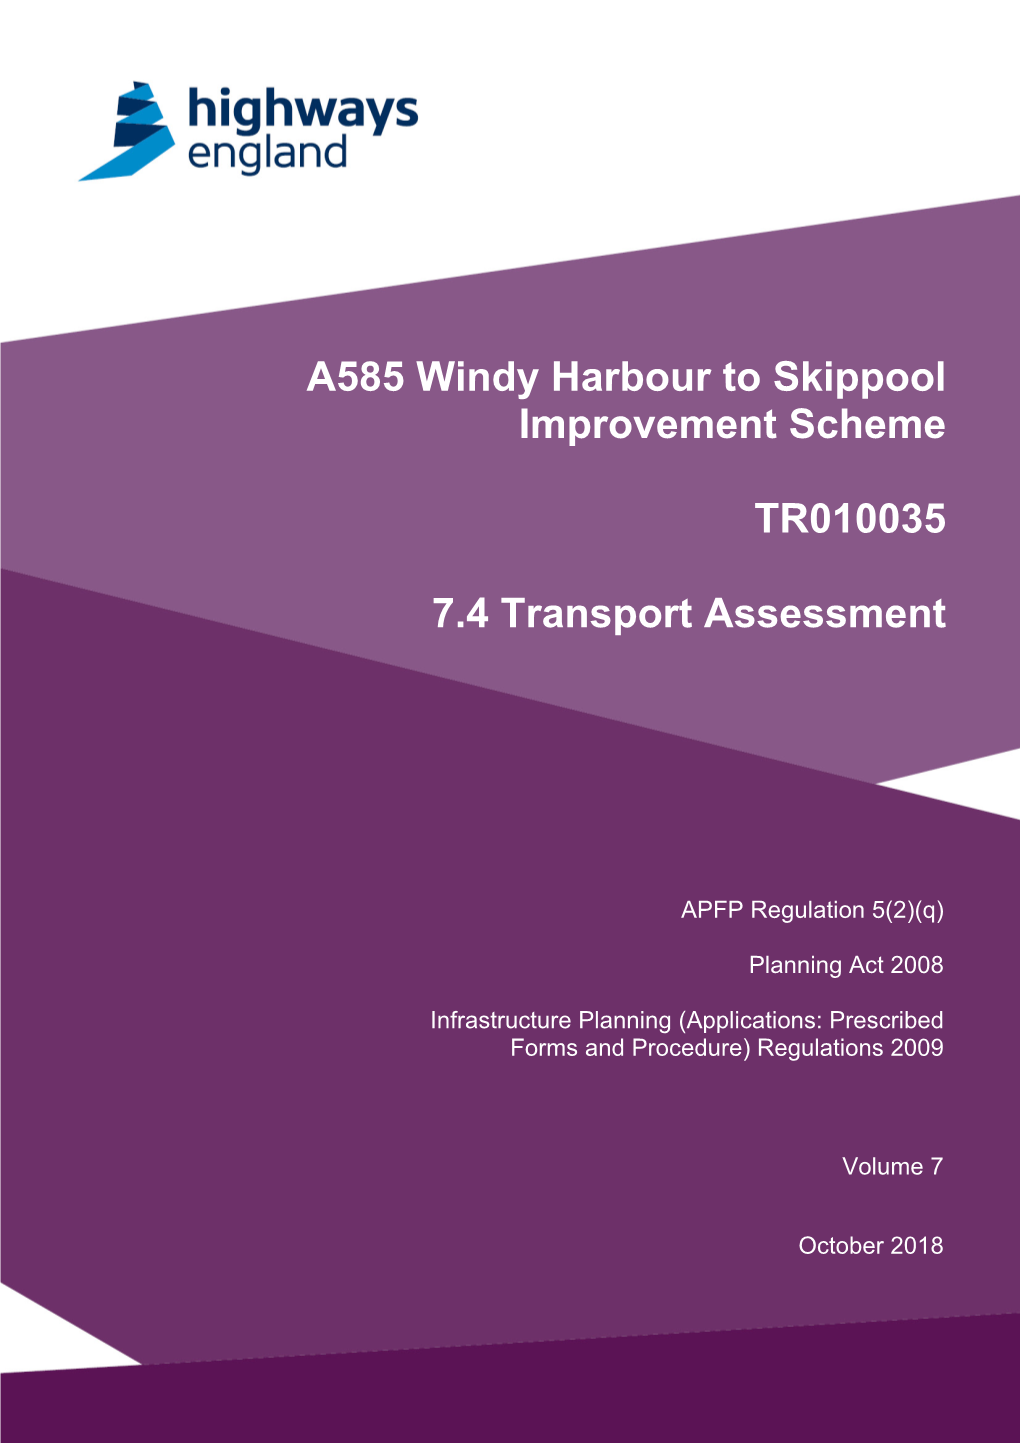 Highways England Is Proposing an Improvement to the A585 Corridor West of the Windy Harbour Junction